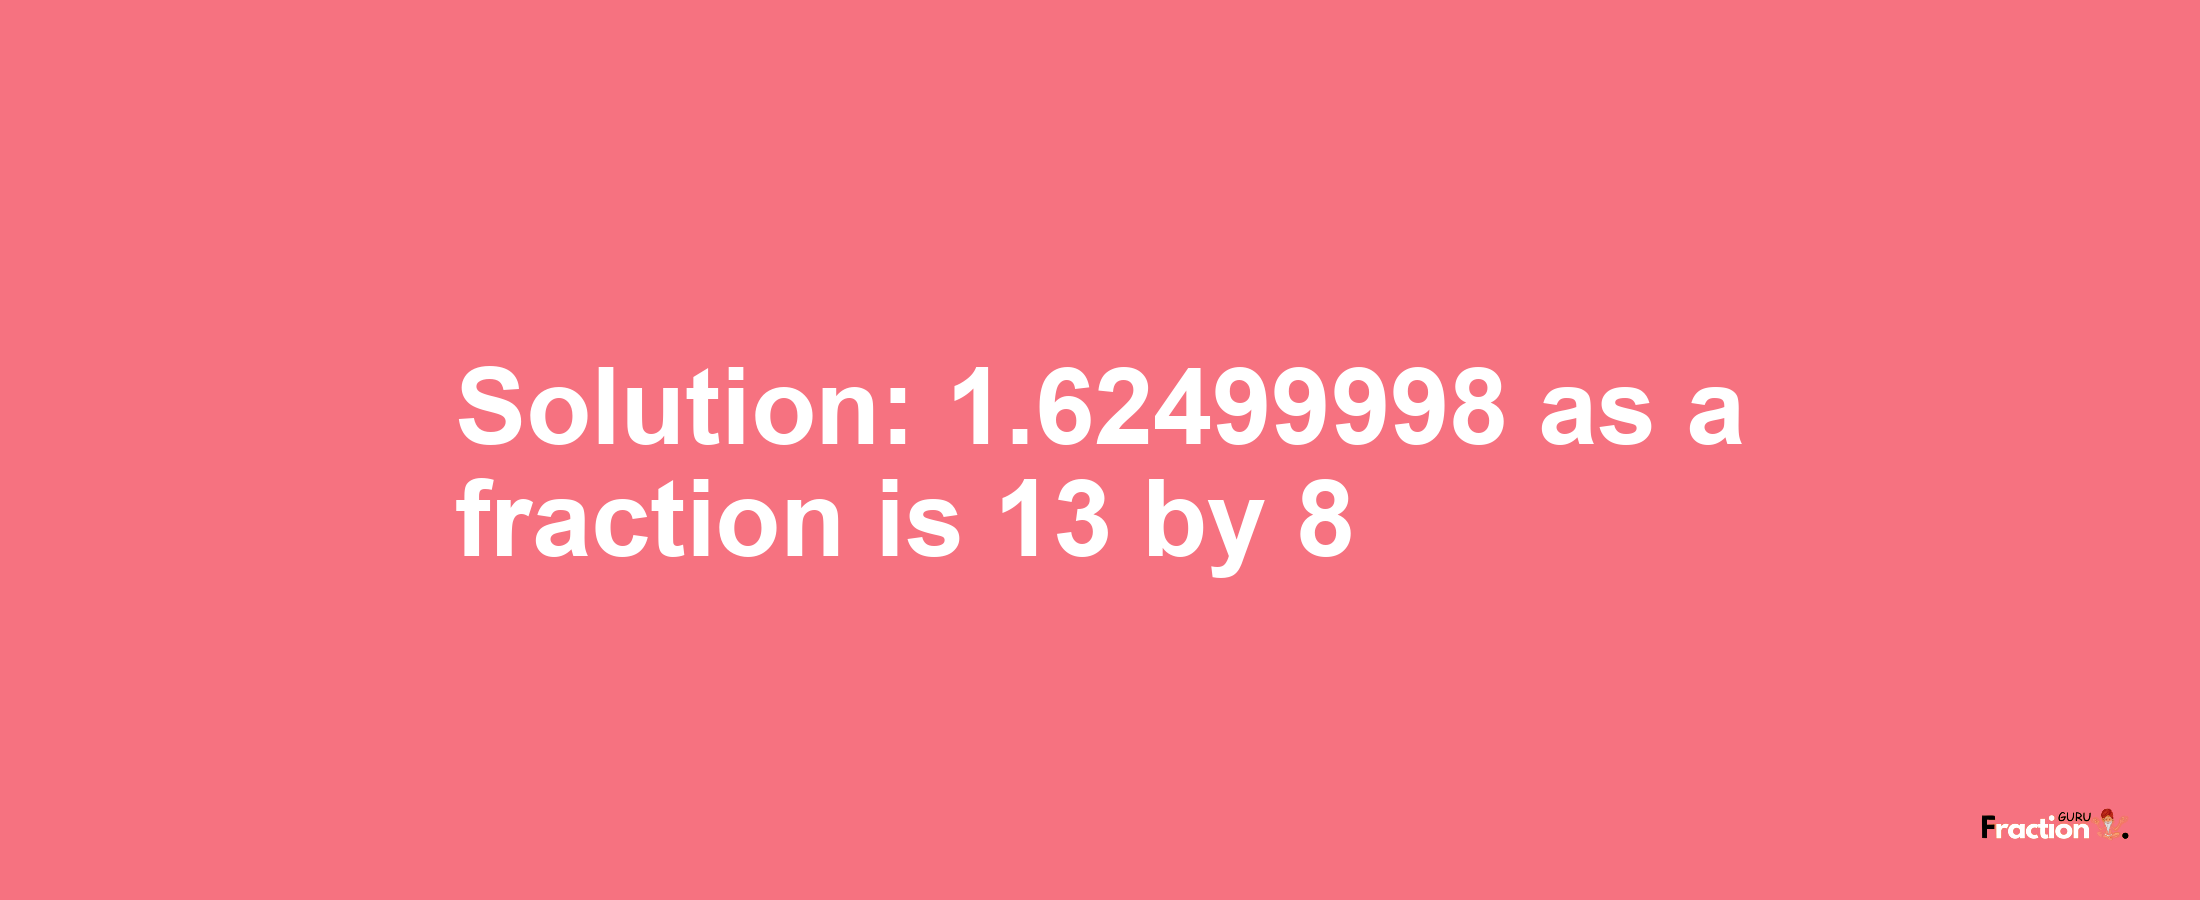 Solution:1.62499998 as a fraction is 13/8